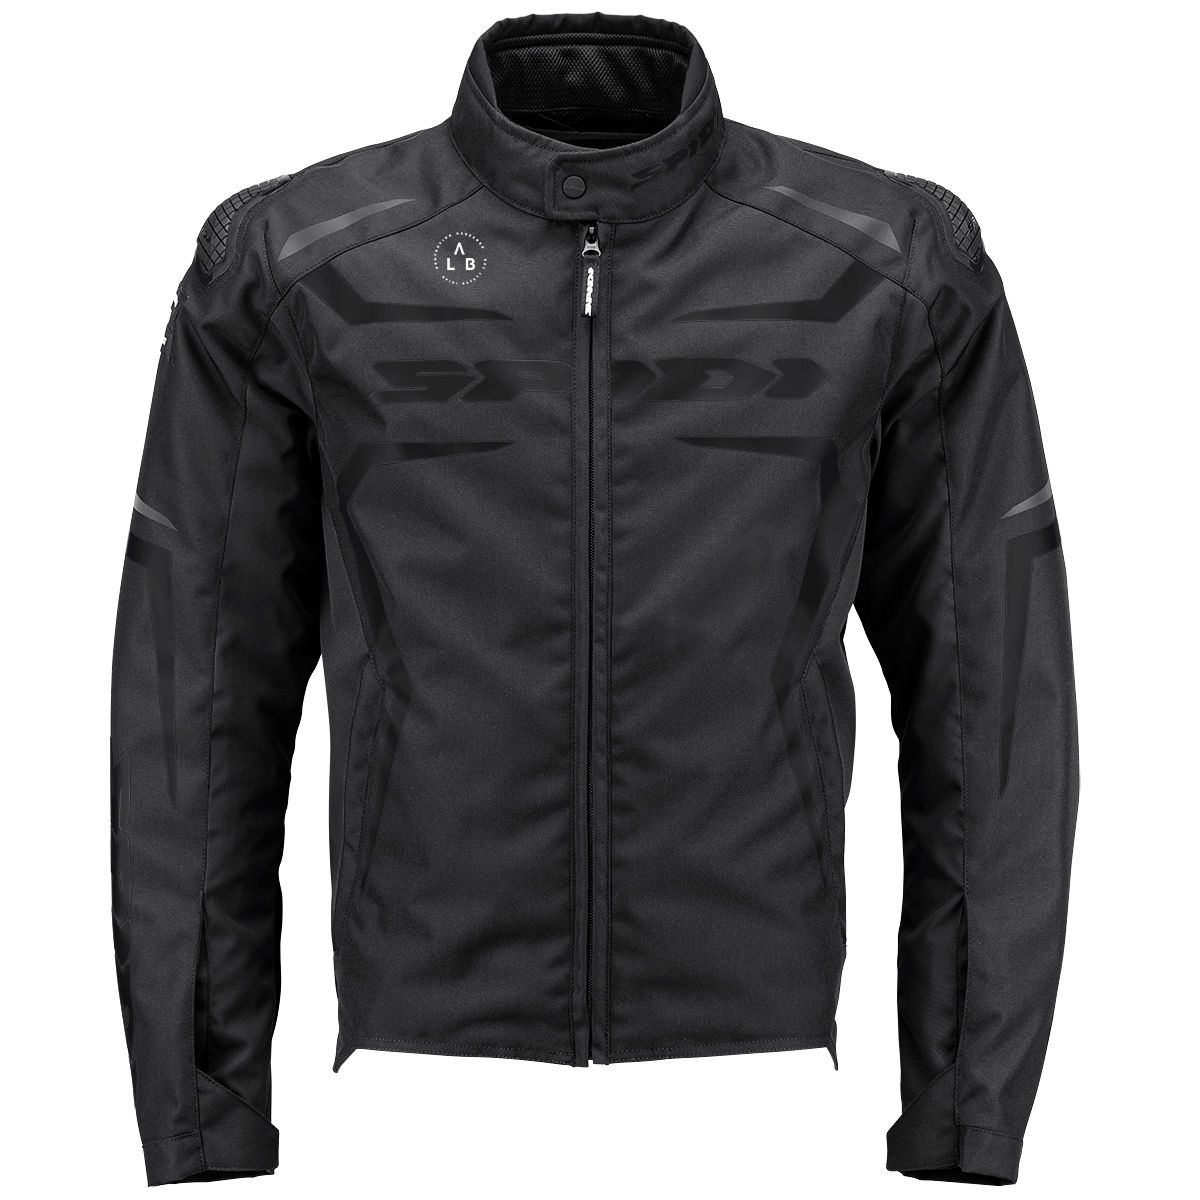 Image of Spidi Race-Evo H2Out Jacket Black Size XL ID 8030161460384